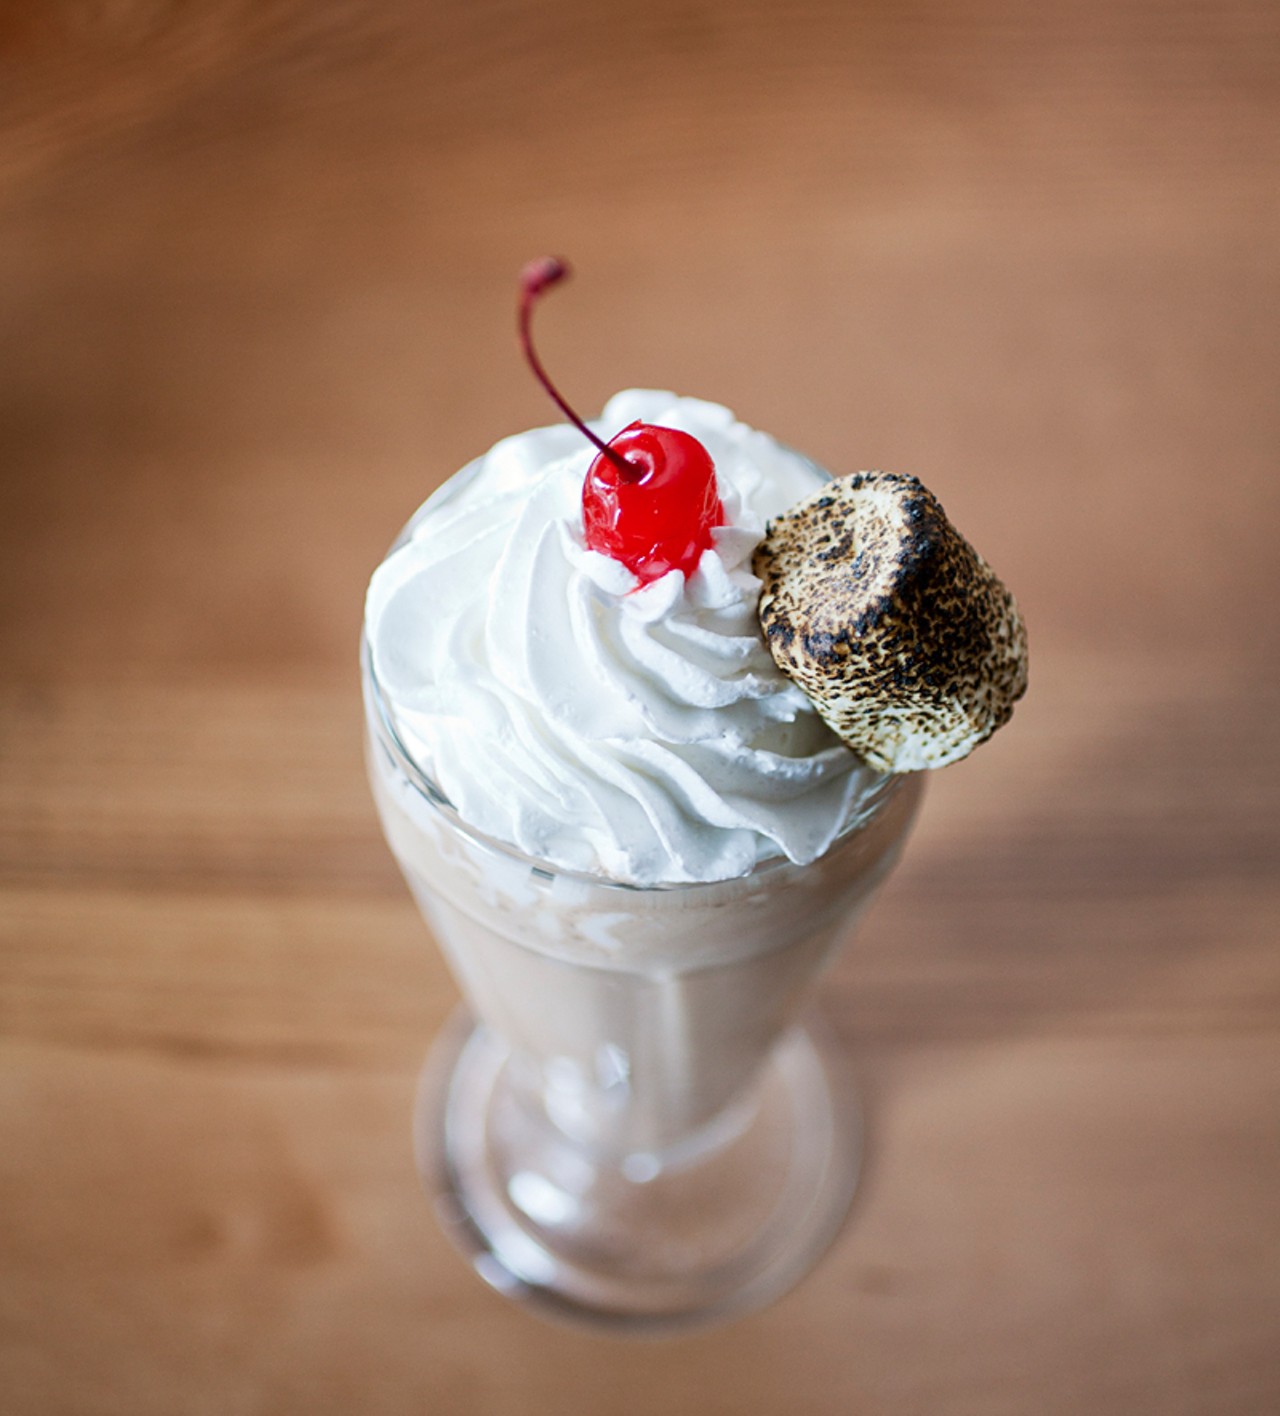 Five Star Burger's chocolate shake is served with whipped cream, toasted marshmallow and a cherry on top, of course!